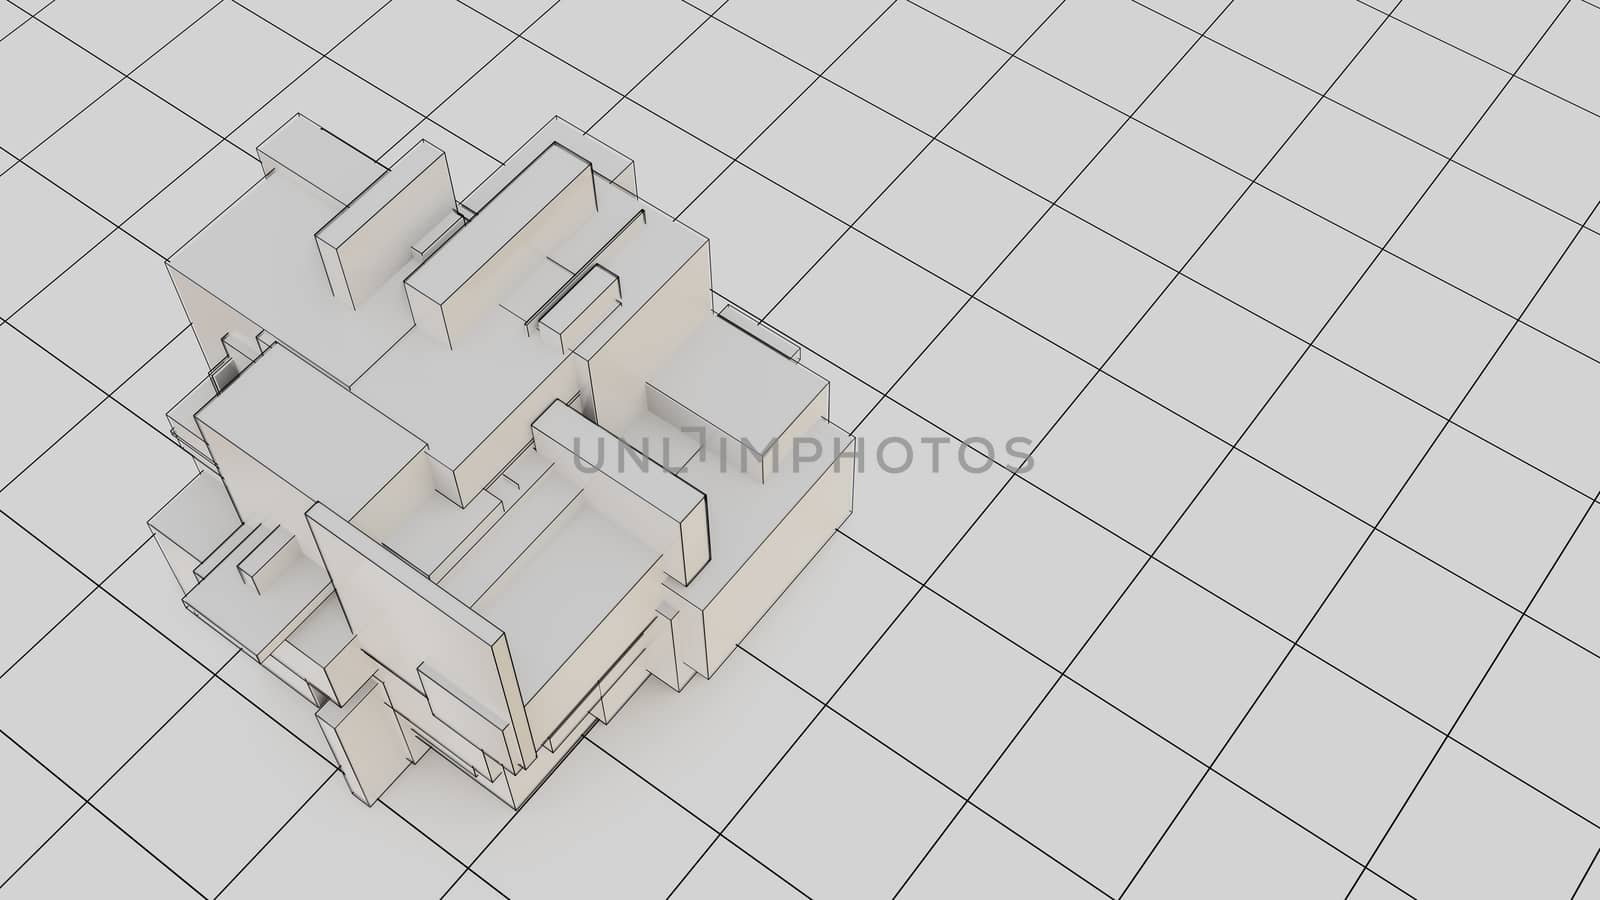 Abstract 3d object consisting of cubes. White background and grid on the floor. Technological 3d illustration for background